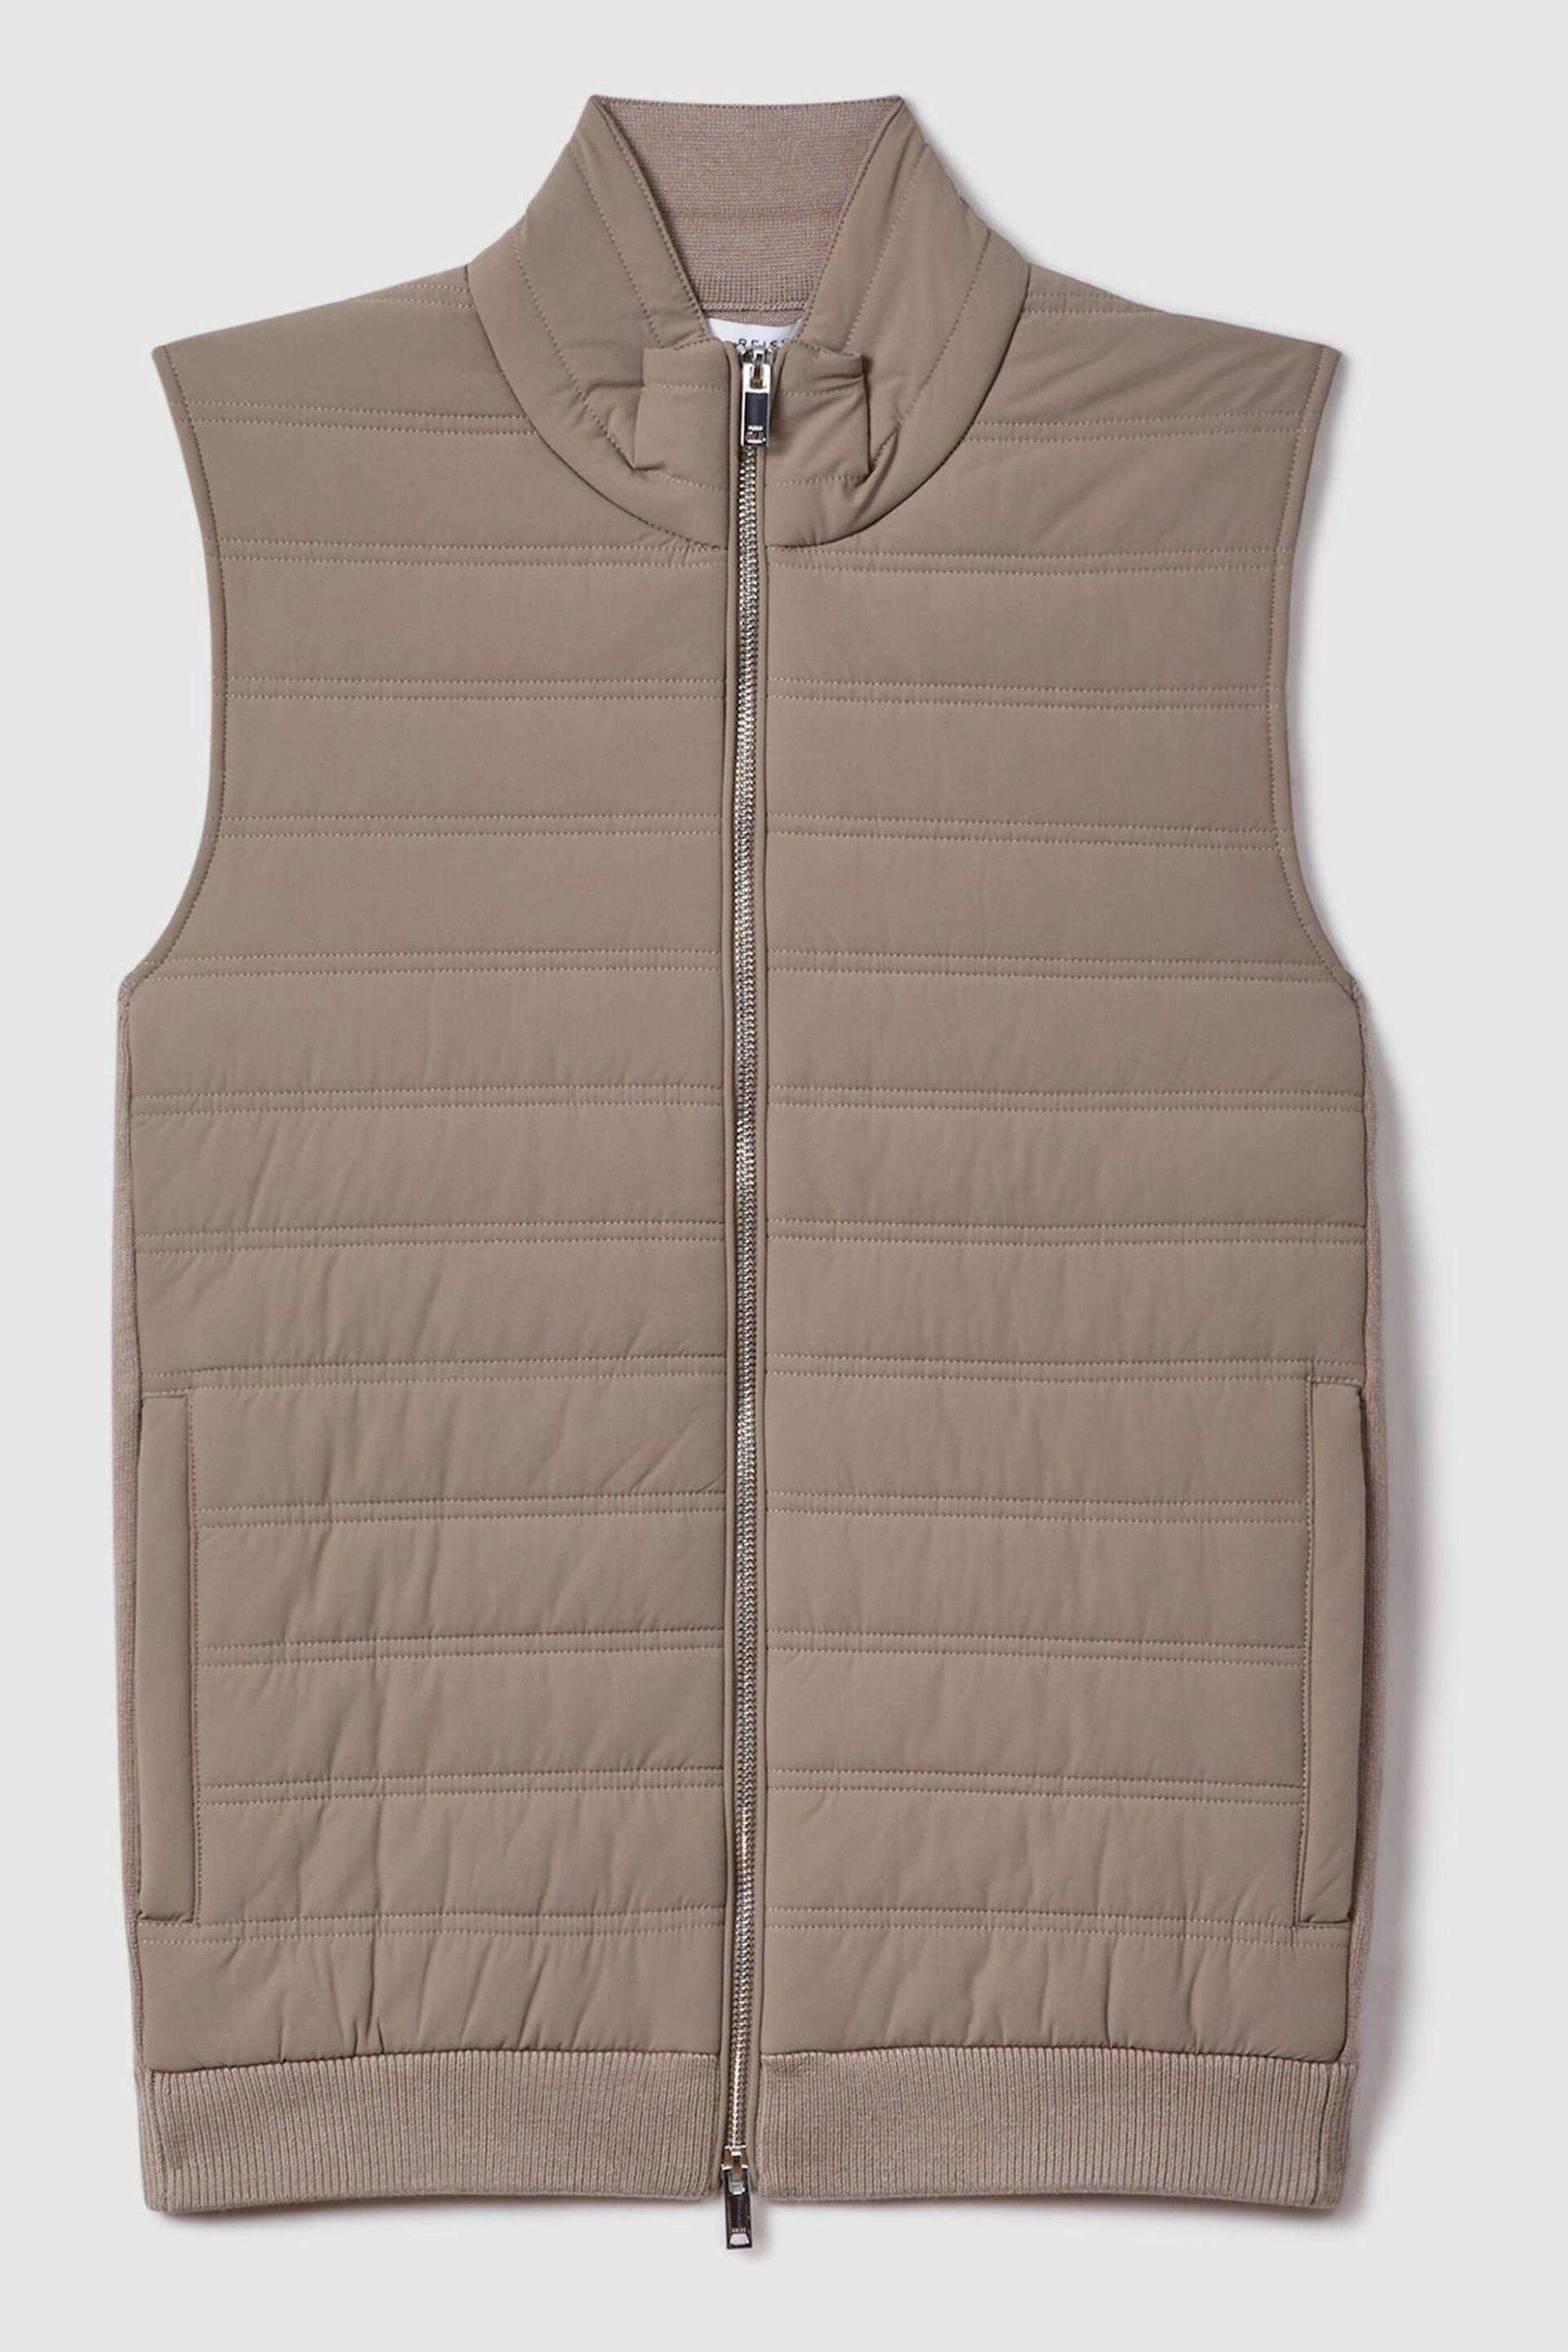 Reiss Mink Cranford Hybrid Quilt and Knit Zip-Through Gilet - Image 2 of 6